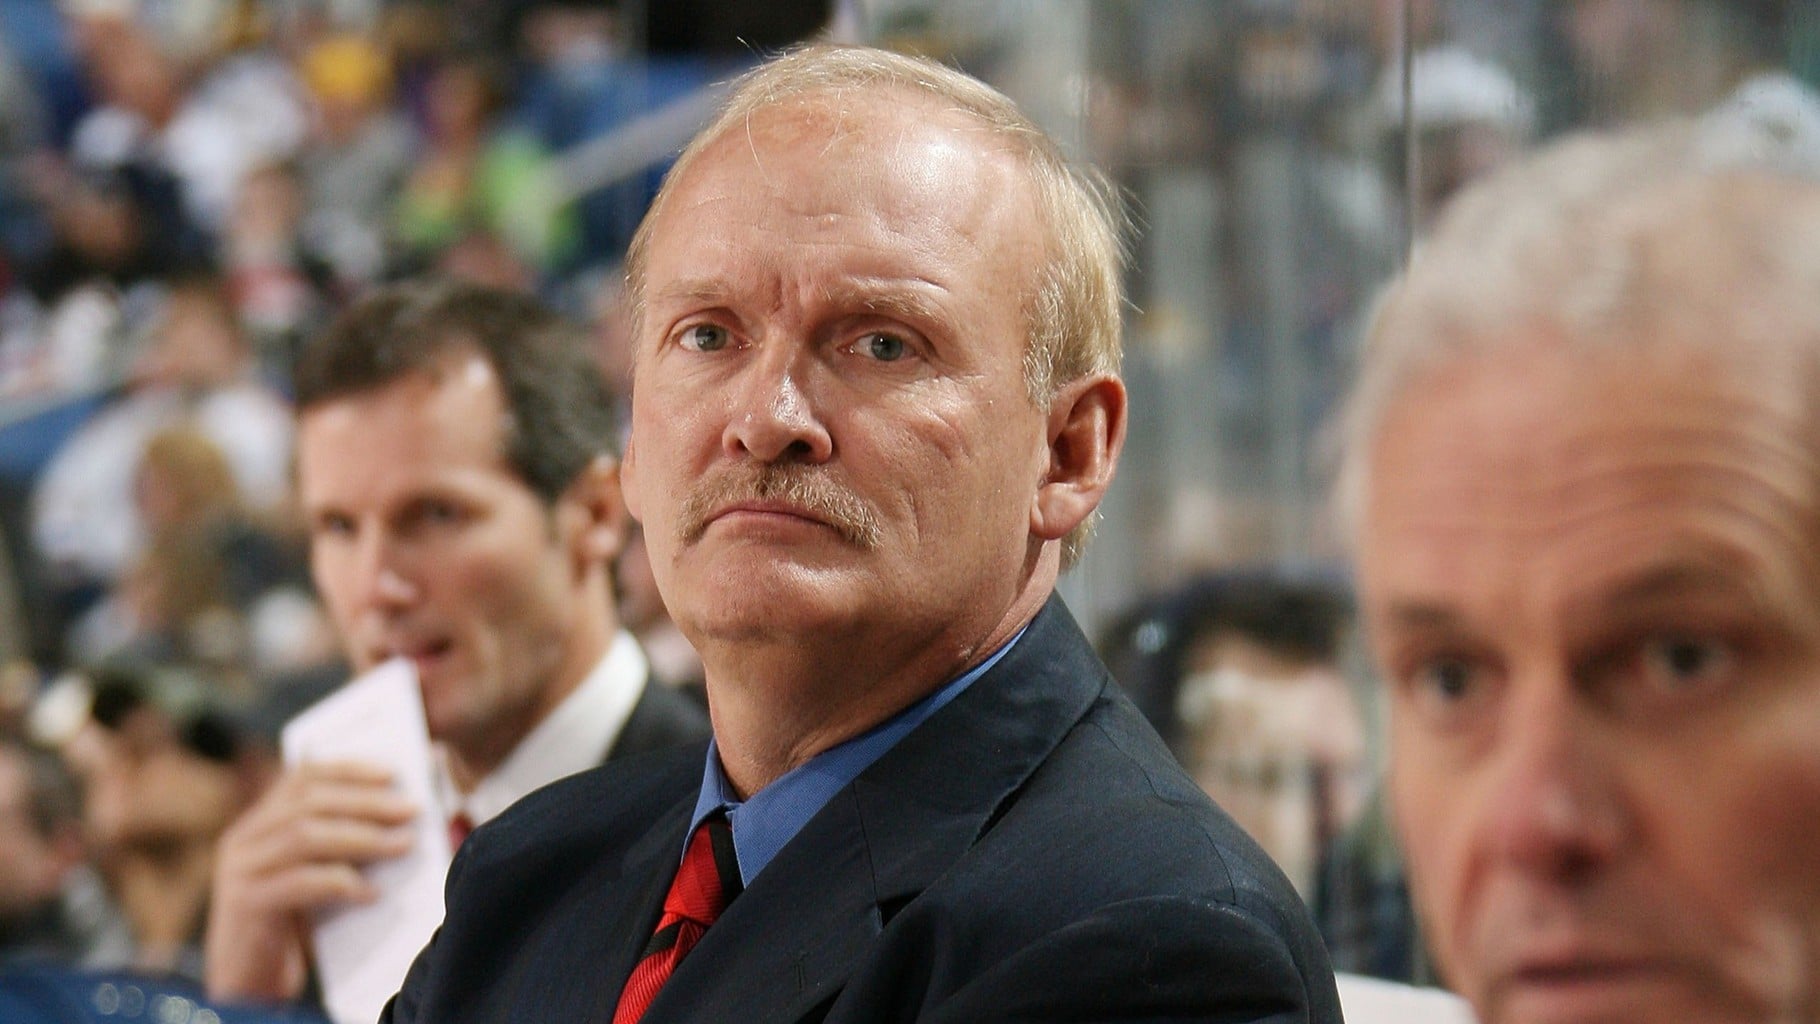 Lindy Ruff blames himself as Devils fail to clinch playoff spot in loss to  Sabres 